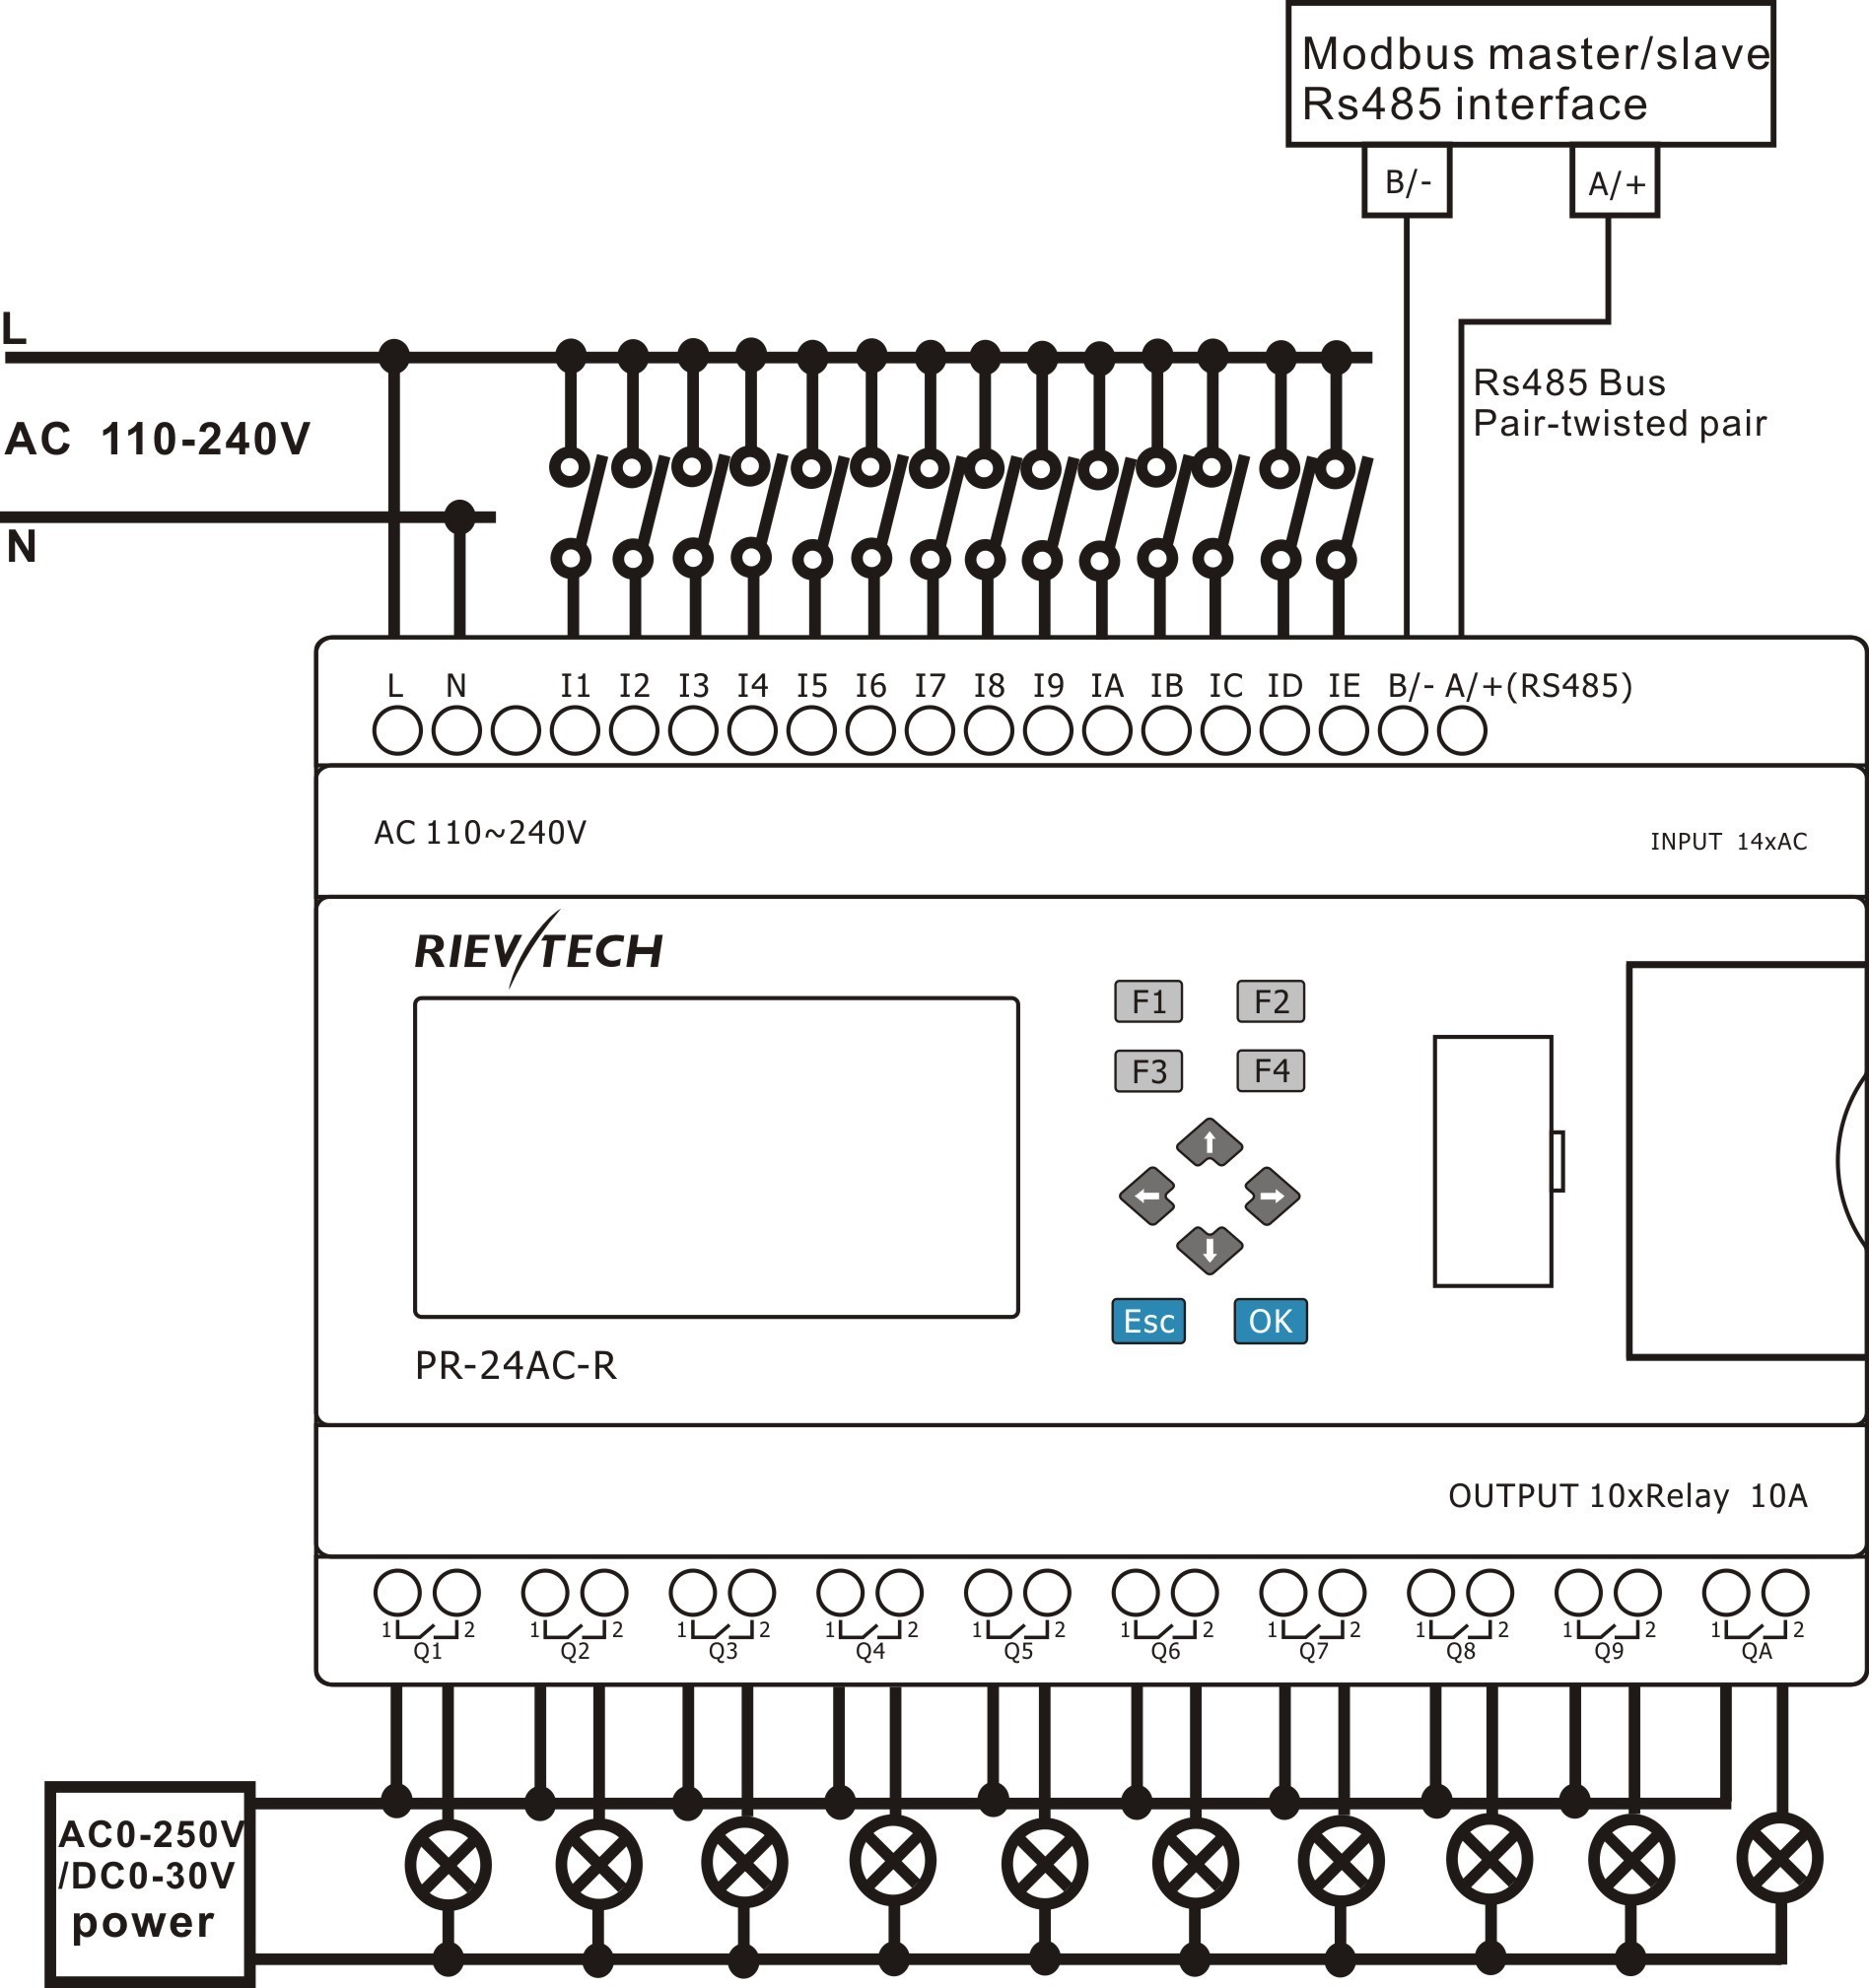 Wiring Diagram With Plc Save Plc Siemens Diagram With Electrical Wiring Diagrams